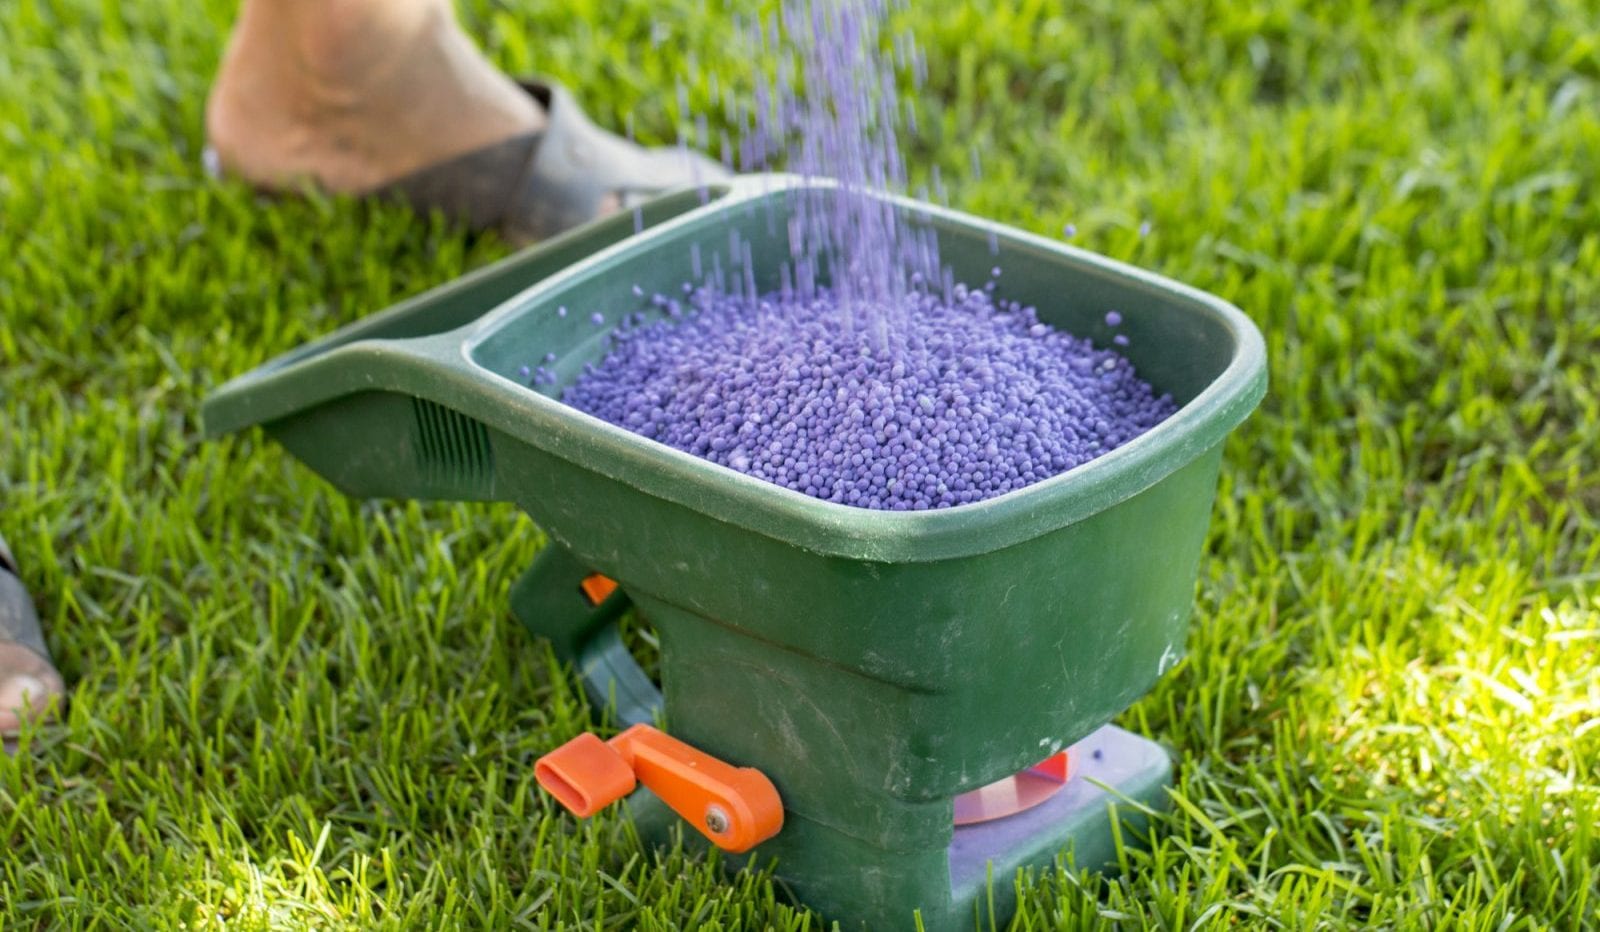 Lawn Fertilizer: What You Should Look For